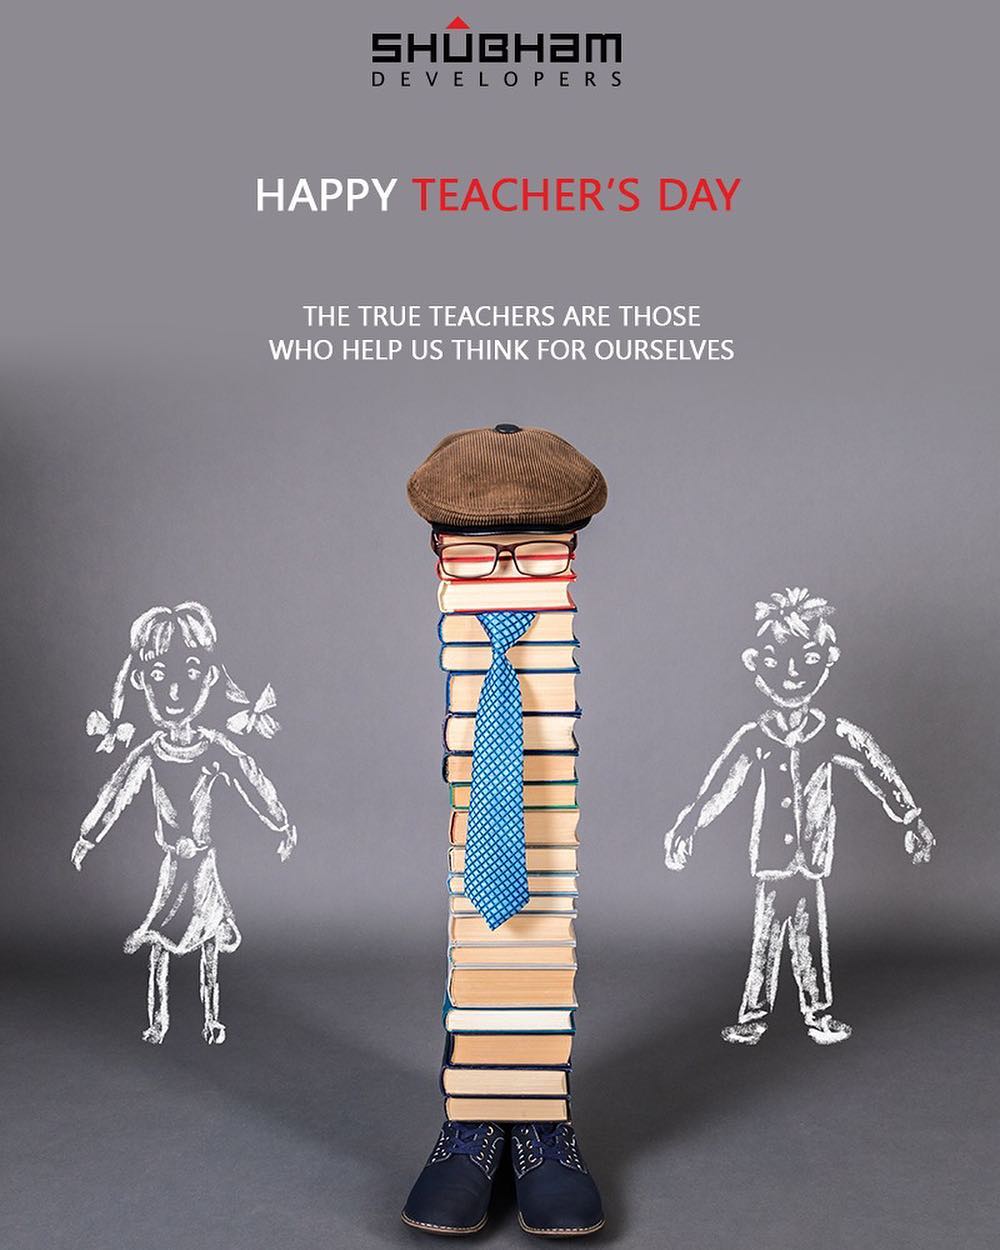 The true teachers are those who help us think for ourselves.

#HappyTeachersDay #TeachersDay #ShubhamDevelopers #RealEstate